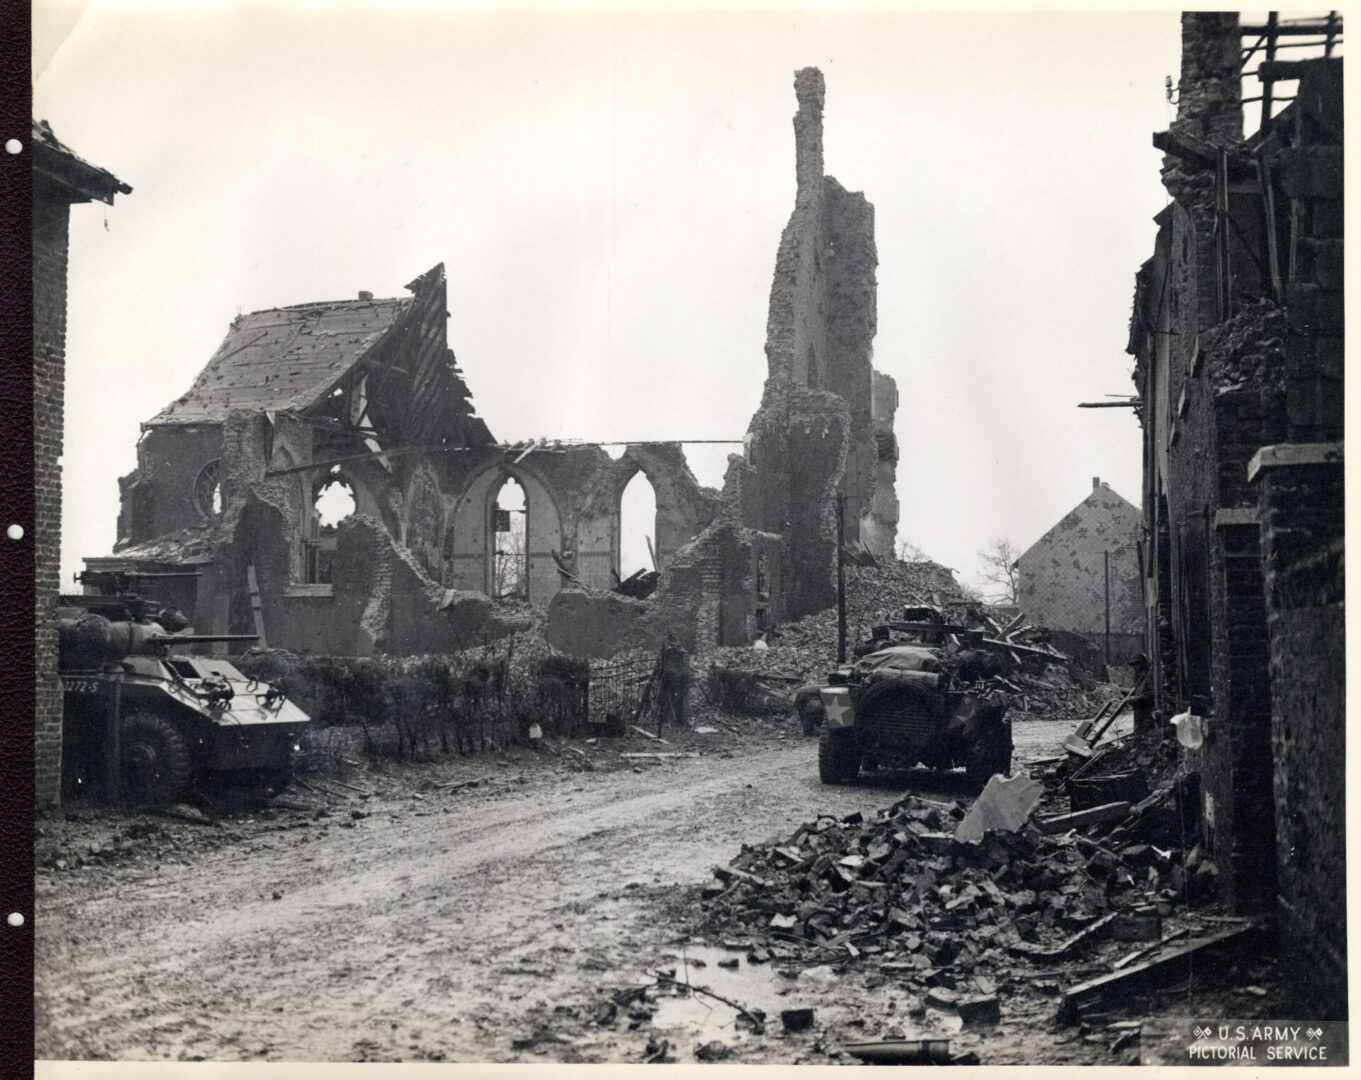 Infantrymen moving through a wrecked town in France